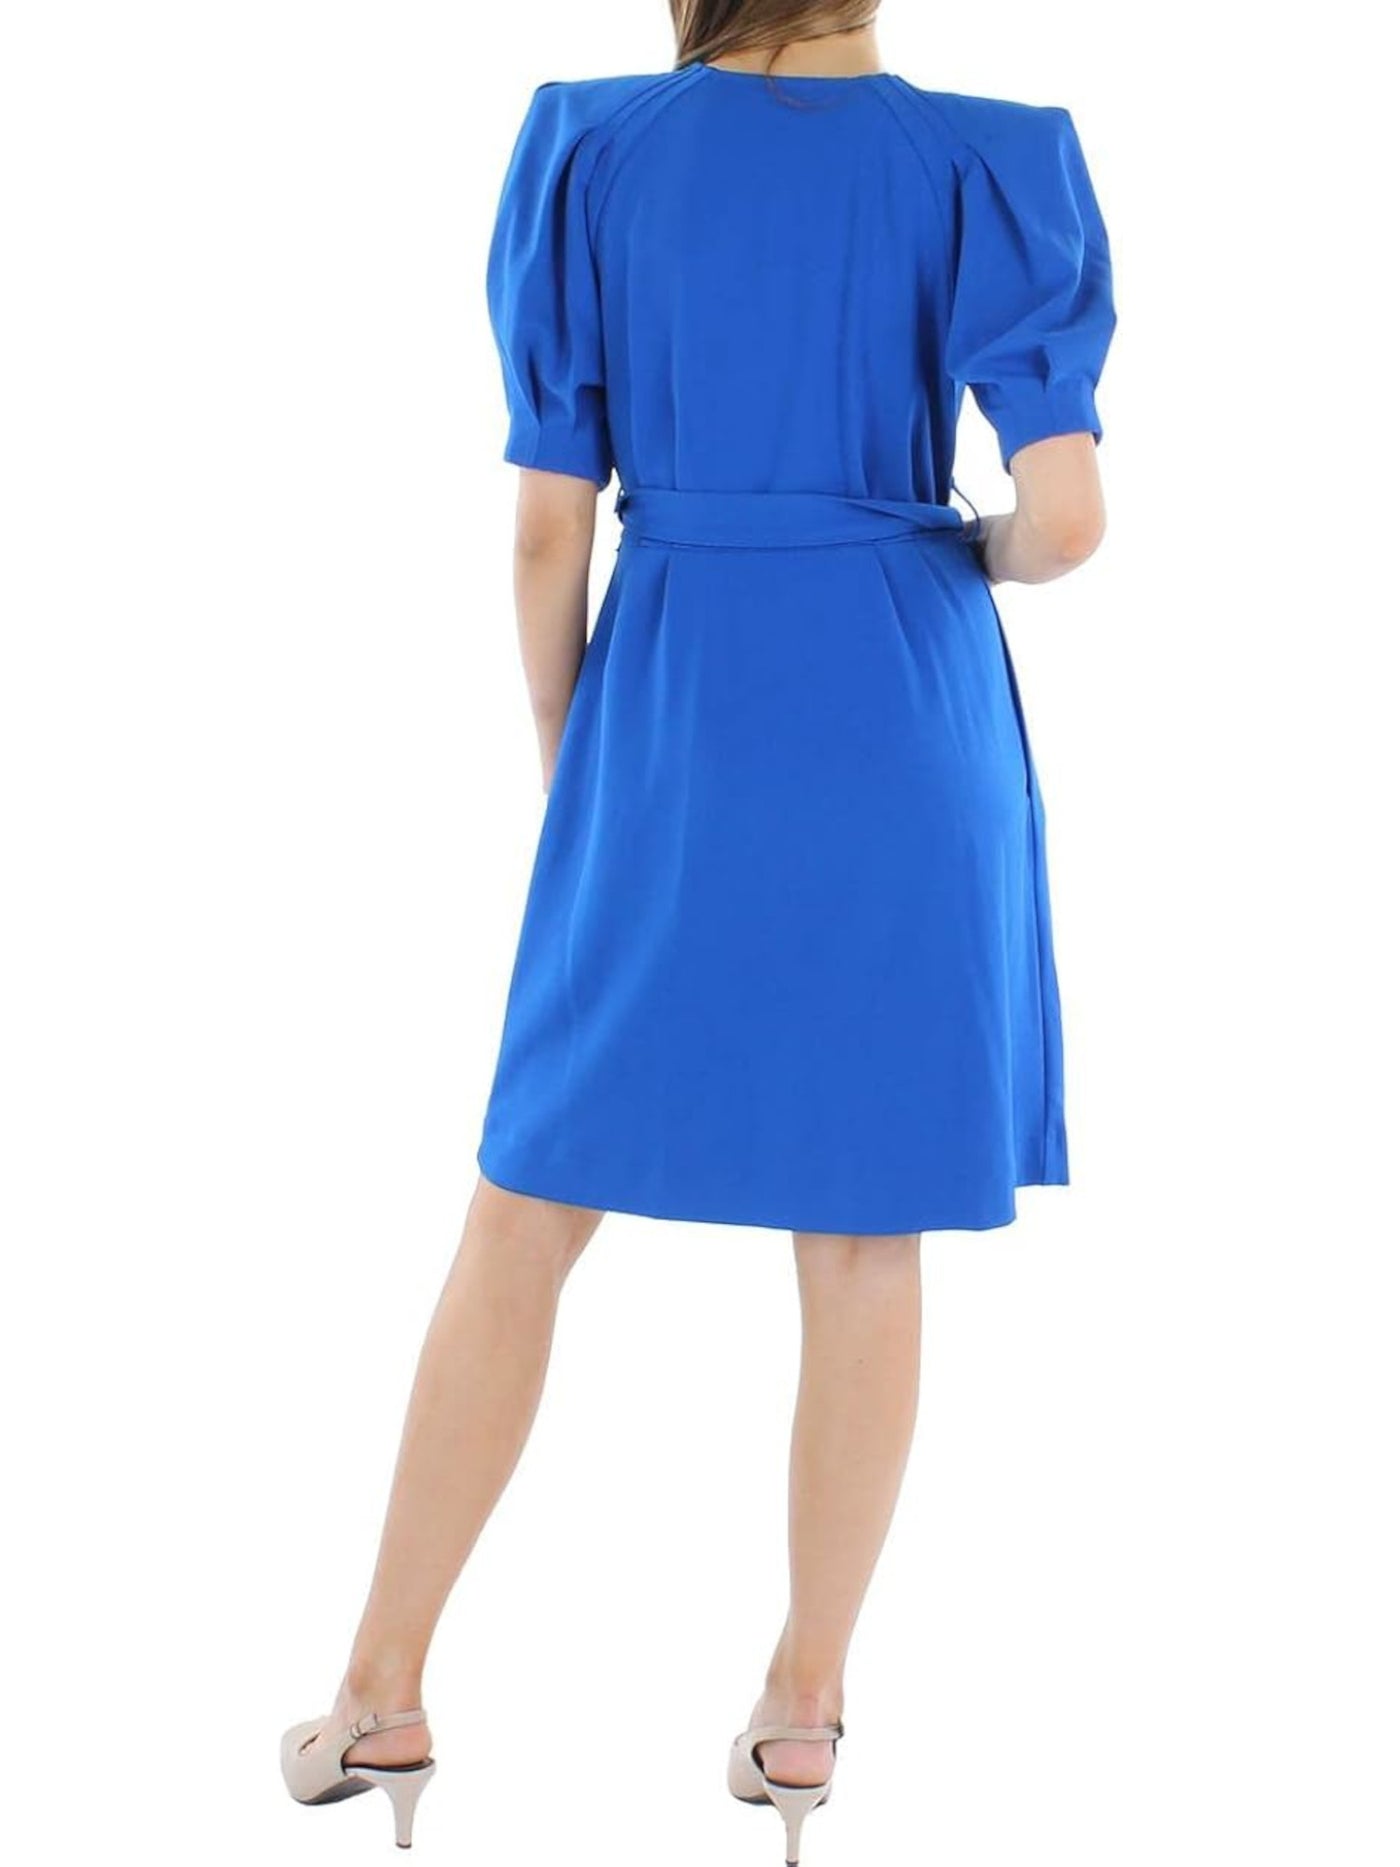 CALVIN KLEIN Womens Blue Tie Pleated Button Up Unlined Shoulder Pads Pouf Sleeve Crew Neck Knee Length Wear To Work Fit + Flare Dress 6